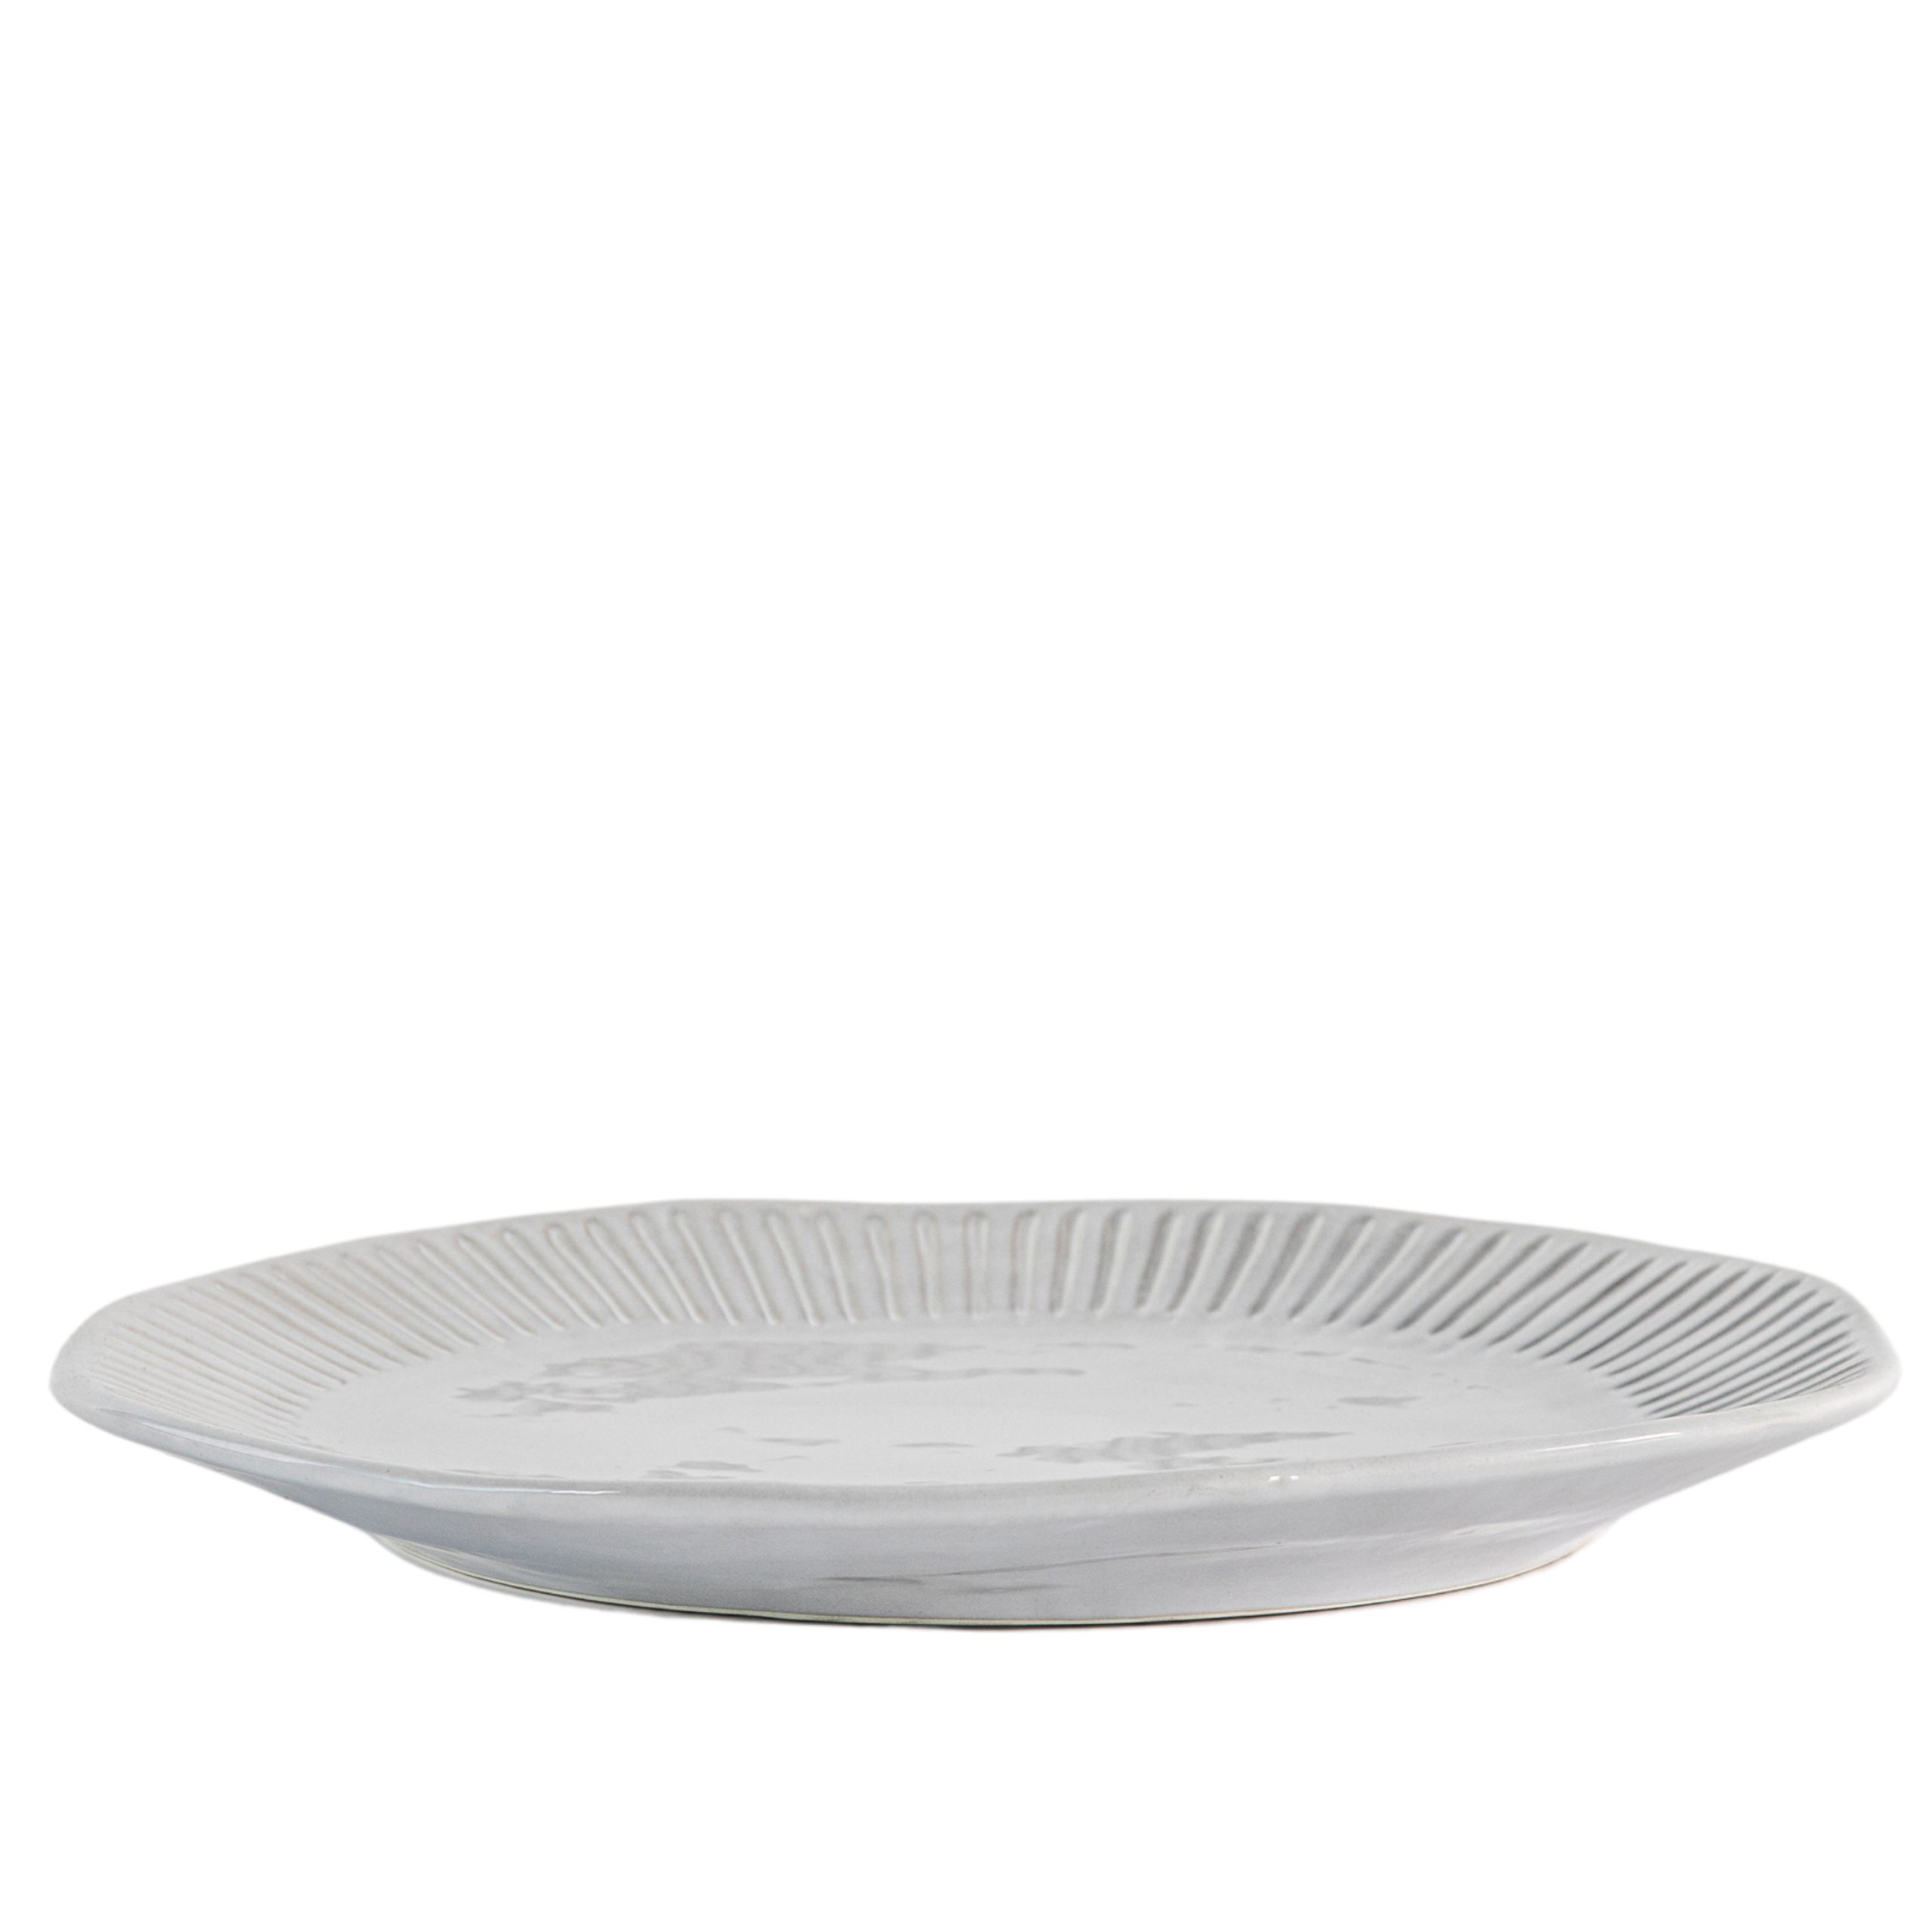 Gallery Direct Organic Ridged Dinner Plate (Pack of 4)